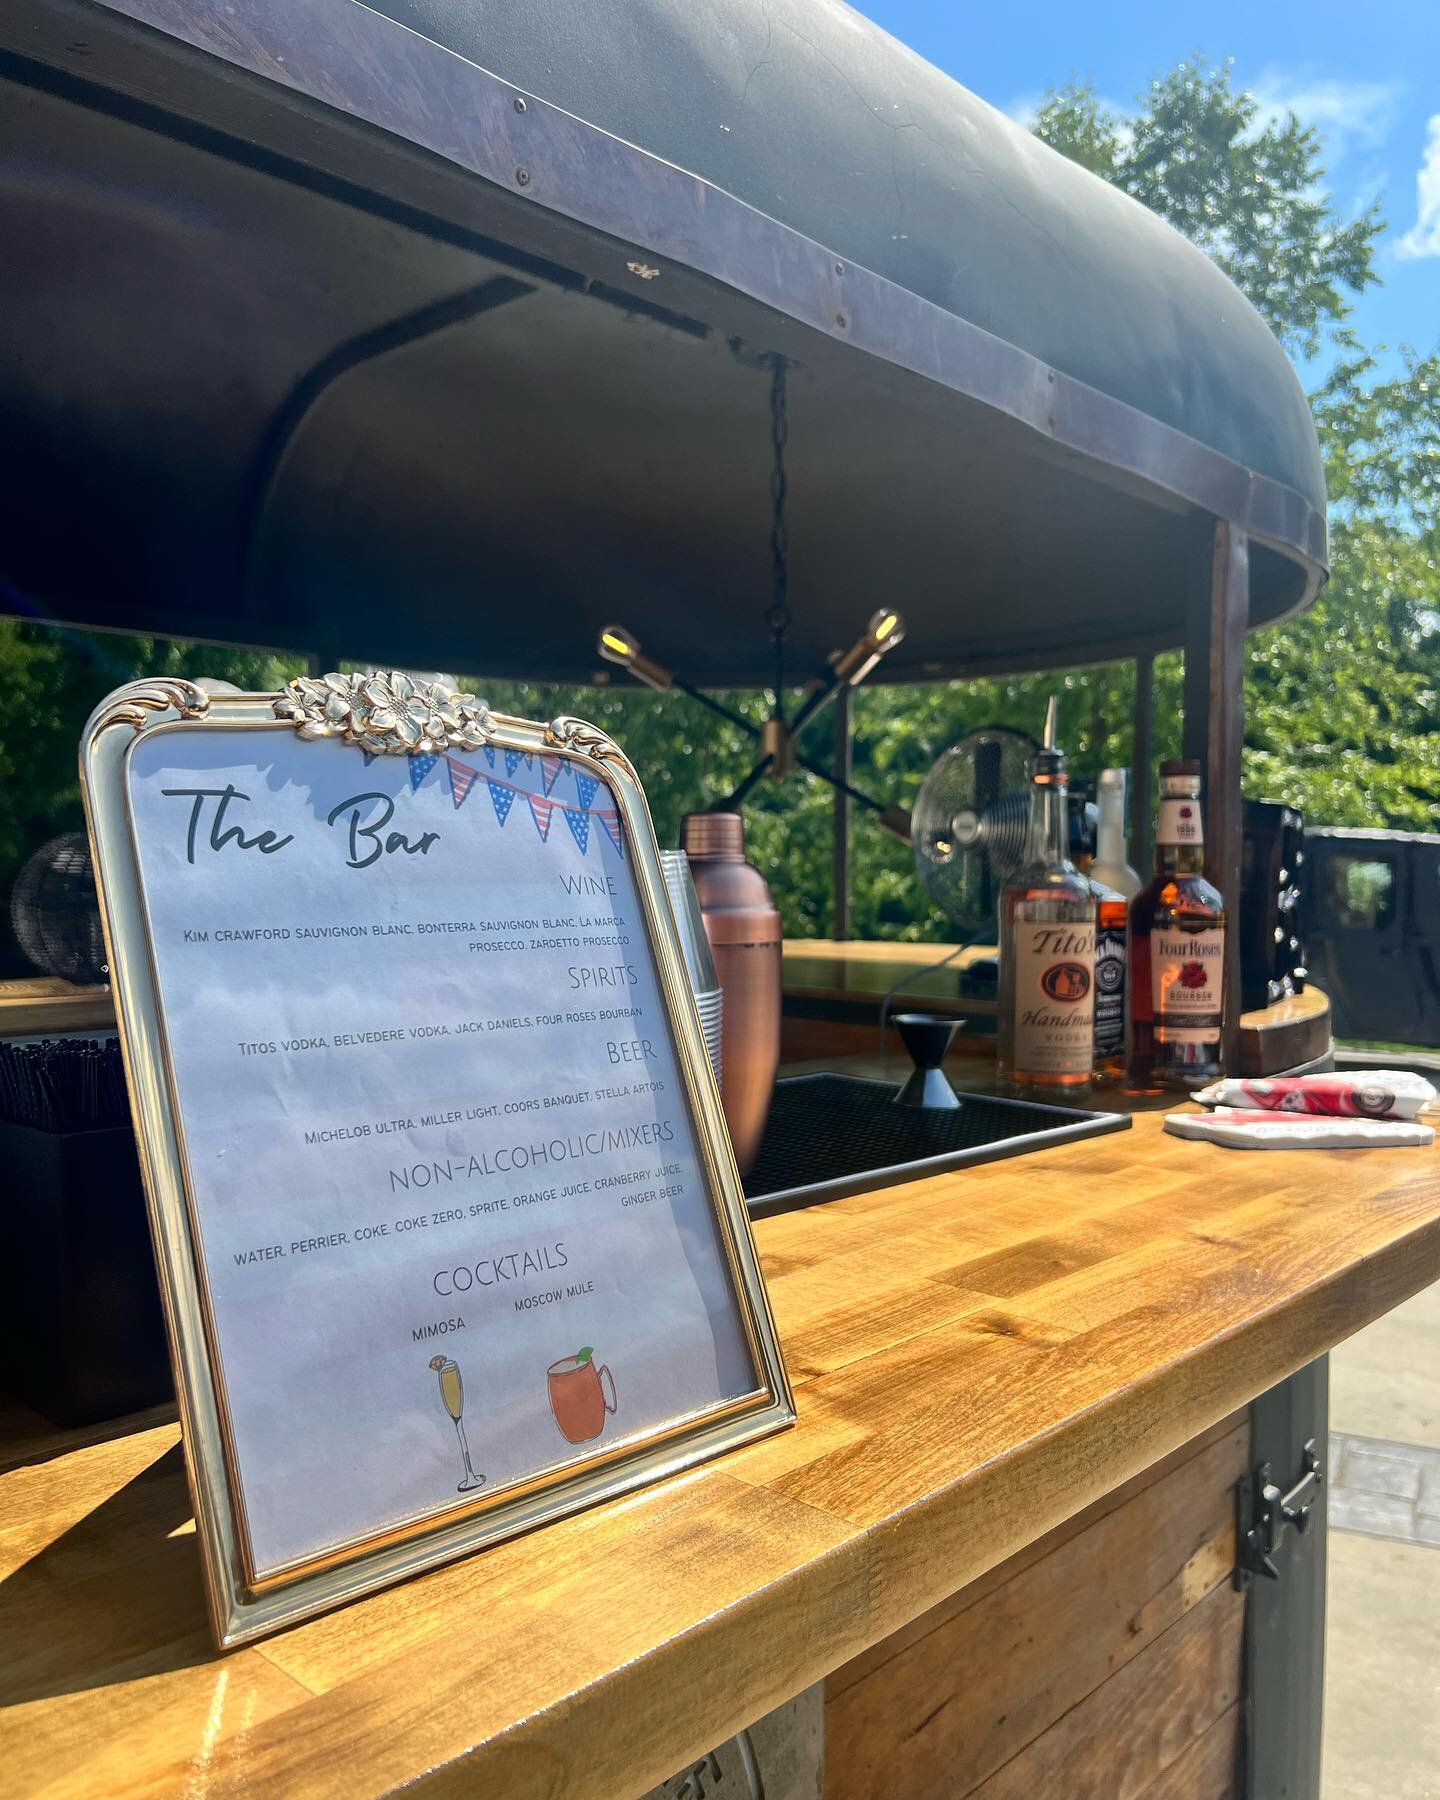 🫧The Fizzy Mule books back yard parties too! 
🫧From weddings to 4th of July barbecues, The Fizzy Mule is perfect for serving your booze! 🍻🍾🍸🍷
🫧We still have 2023 availability-BOOK NOW! 

Let&rsquo;s Get Fizzy!

#mobilebar #horsetrailerbar #nas